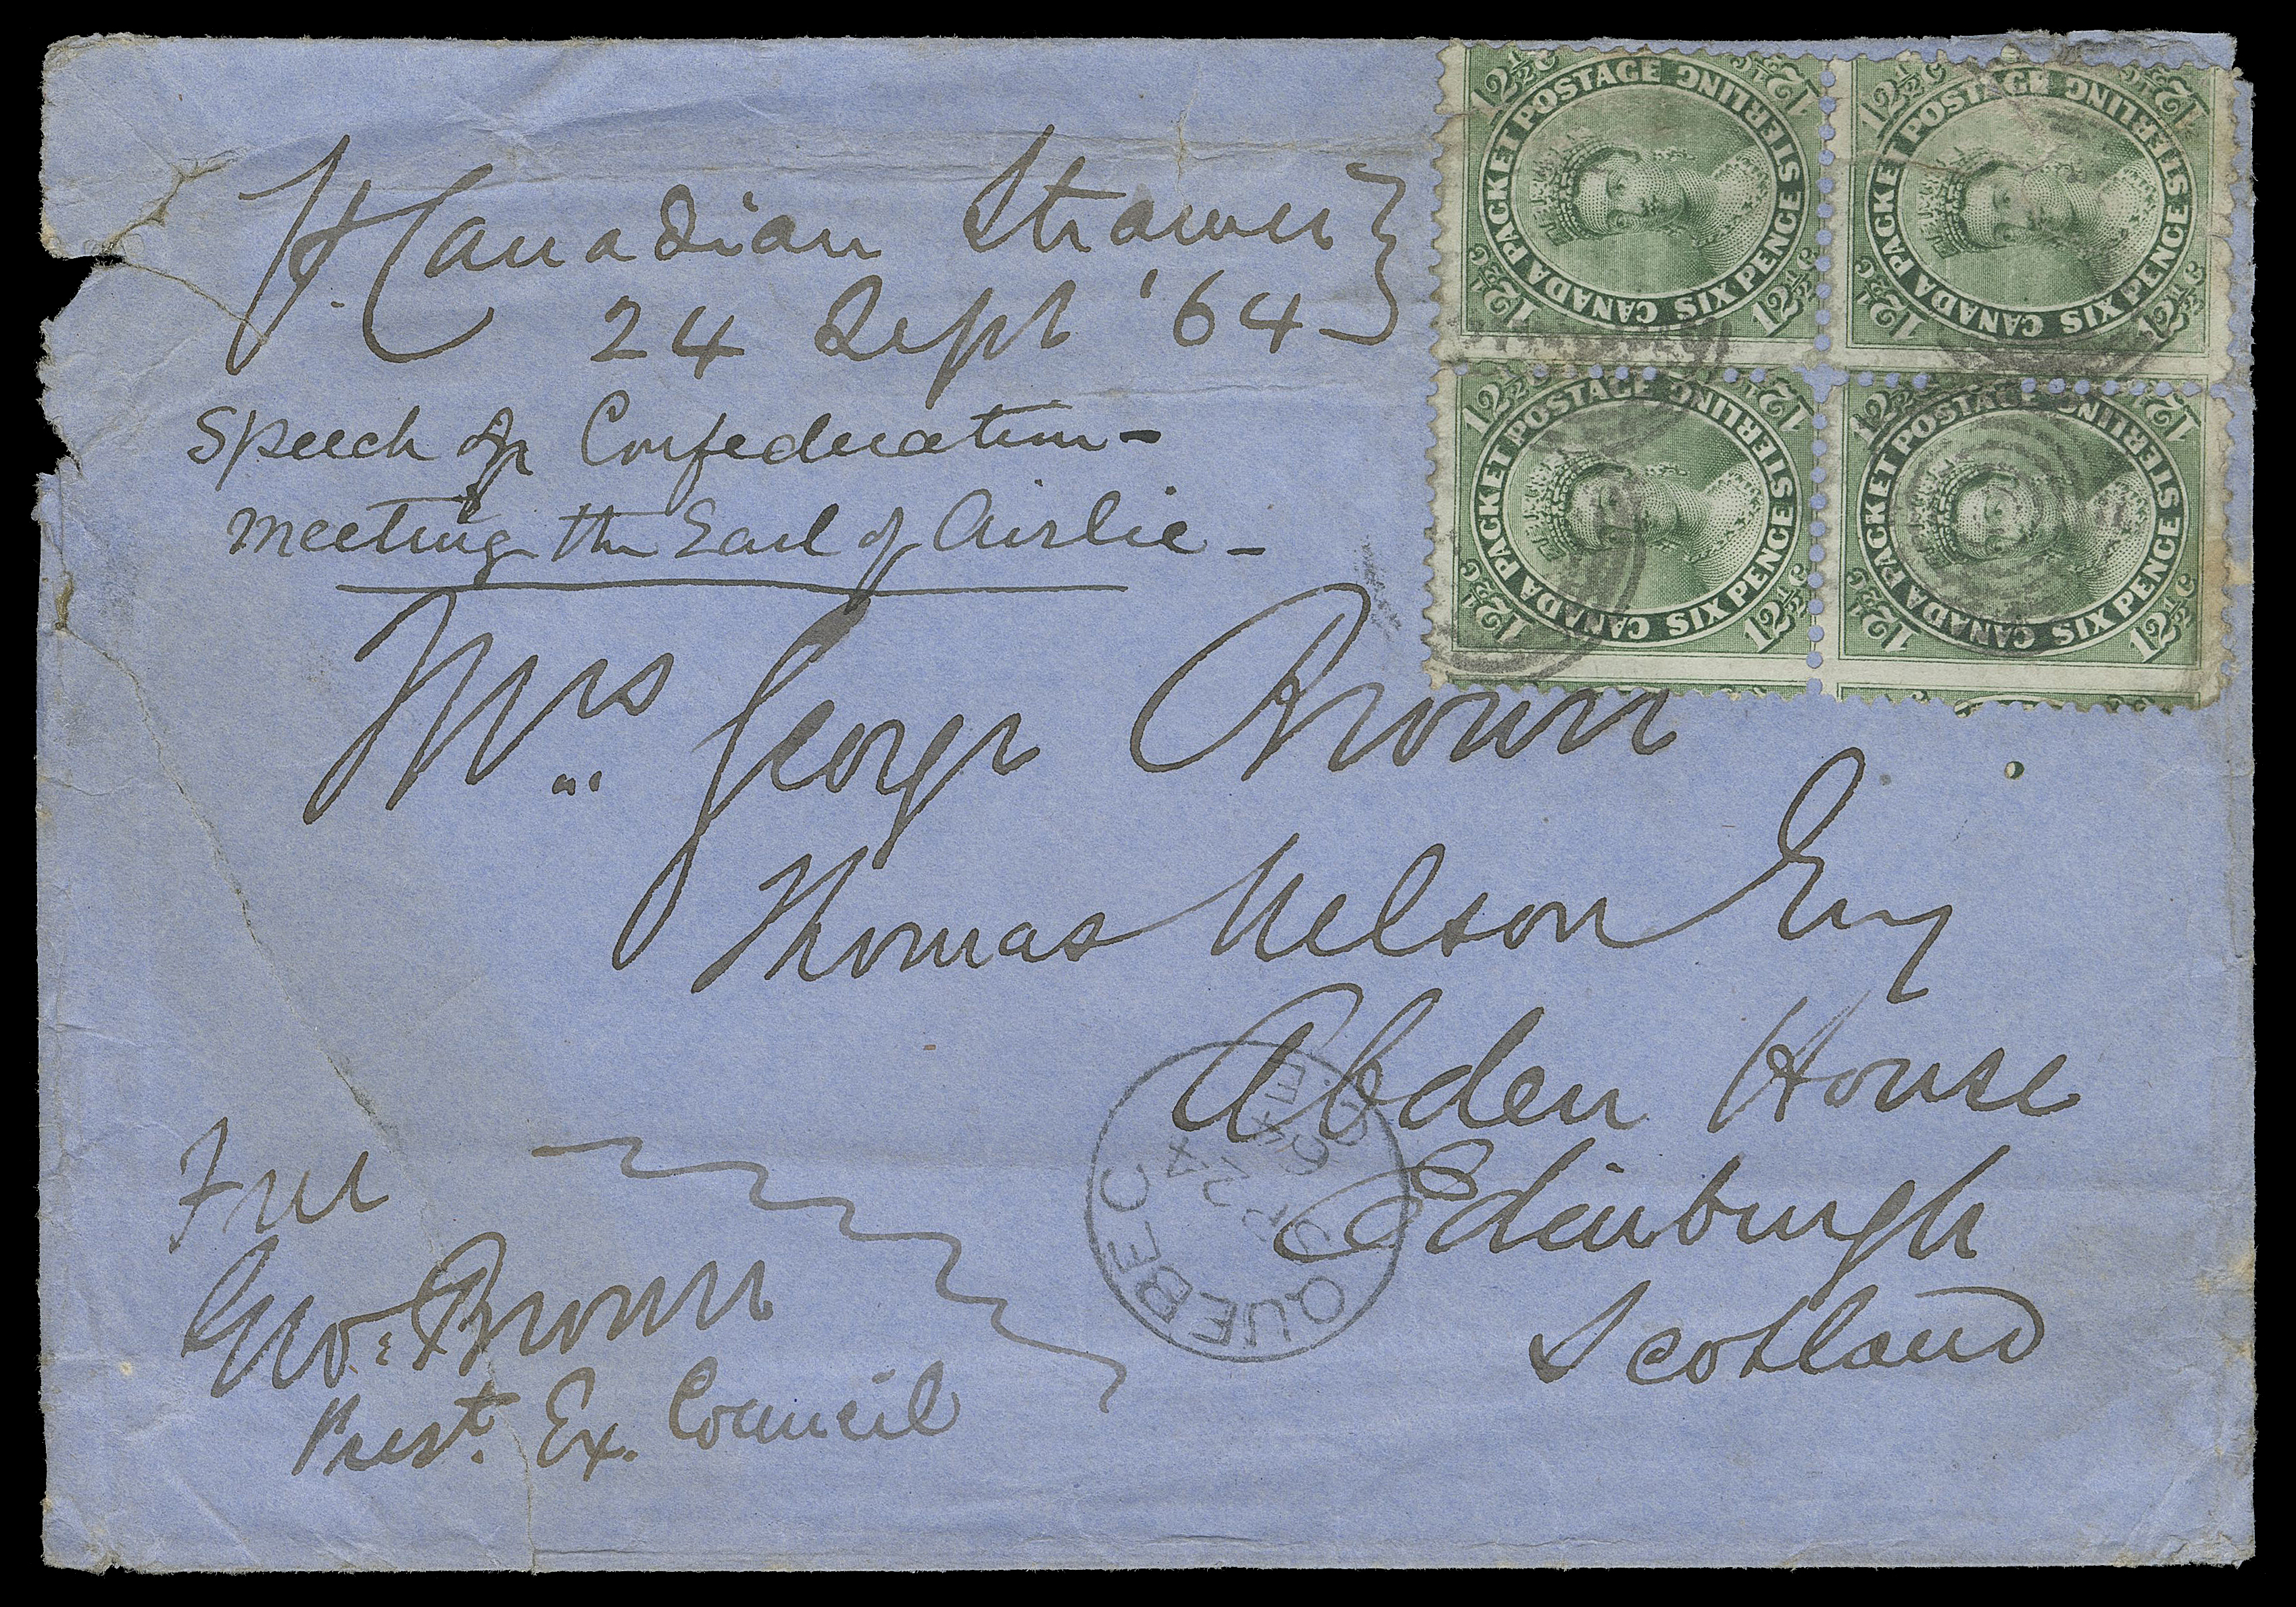 SEVEN AND ONE HALF PENCE AND TWELVE AND ONE HALF CENTS  1864 (September 24) Blue envelope with red cameo embossed Executive Council "Crown" Canada seal on backflap, various faults and wrinkling to cover and franking due to heavy content, pays a quadruple Allan Line - Canadian Packet letter rate to United Kingdom with a block of 12½c green, perf 12x11¾ tied by concentric rings, clear Quebec SP 24 64 CDS, endorsed "P. Canadian Steamer 24 Sept 